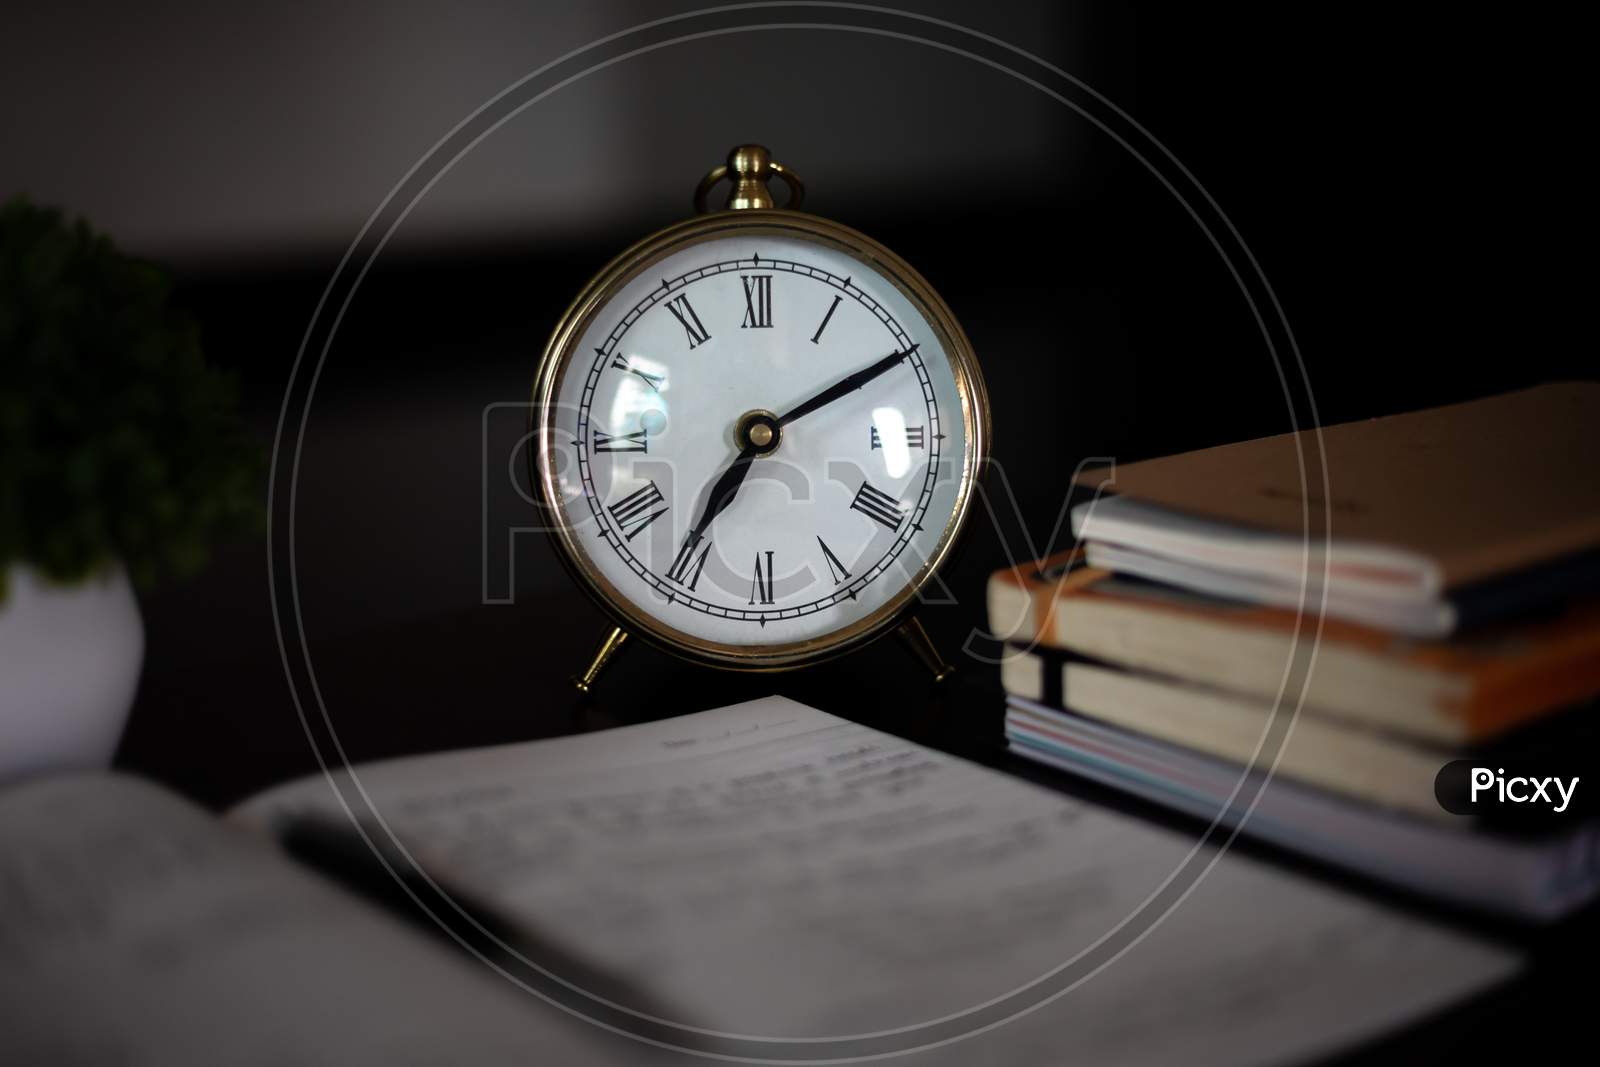 Aesthetic Antique clock showing 7'o clock. Work from home WFH. Workspace with books and indoor plant on dark black office table desk. Closeup, profile shot. Notepad taking notes. Home office.